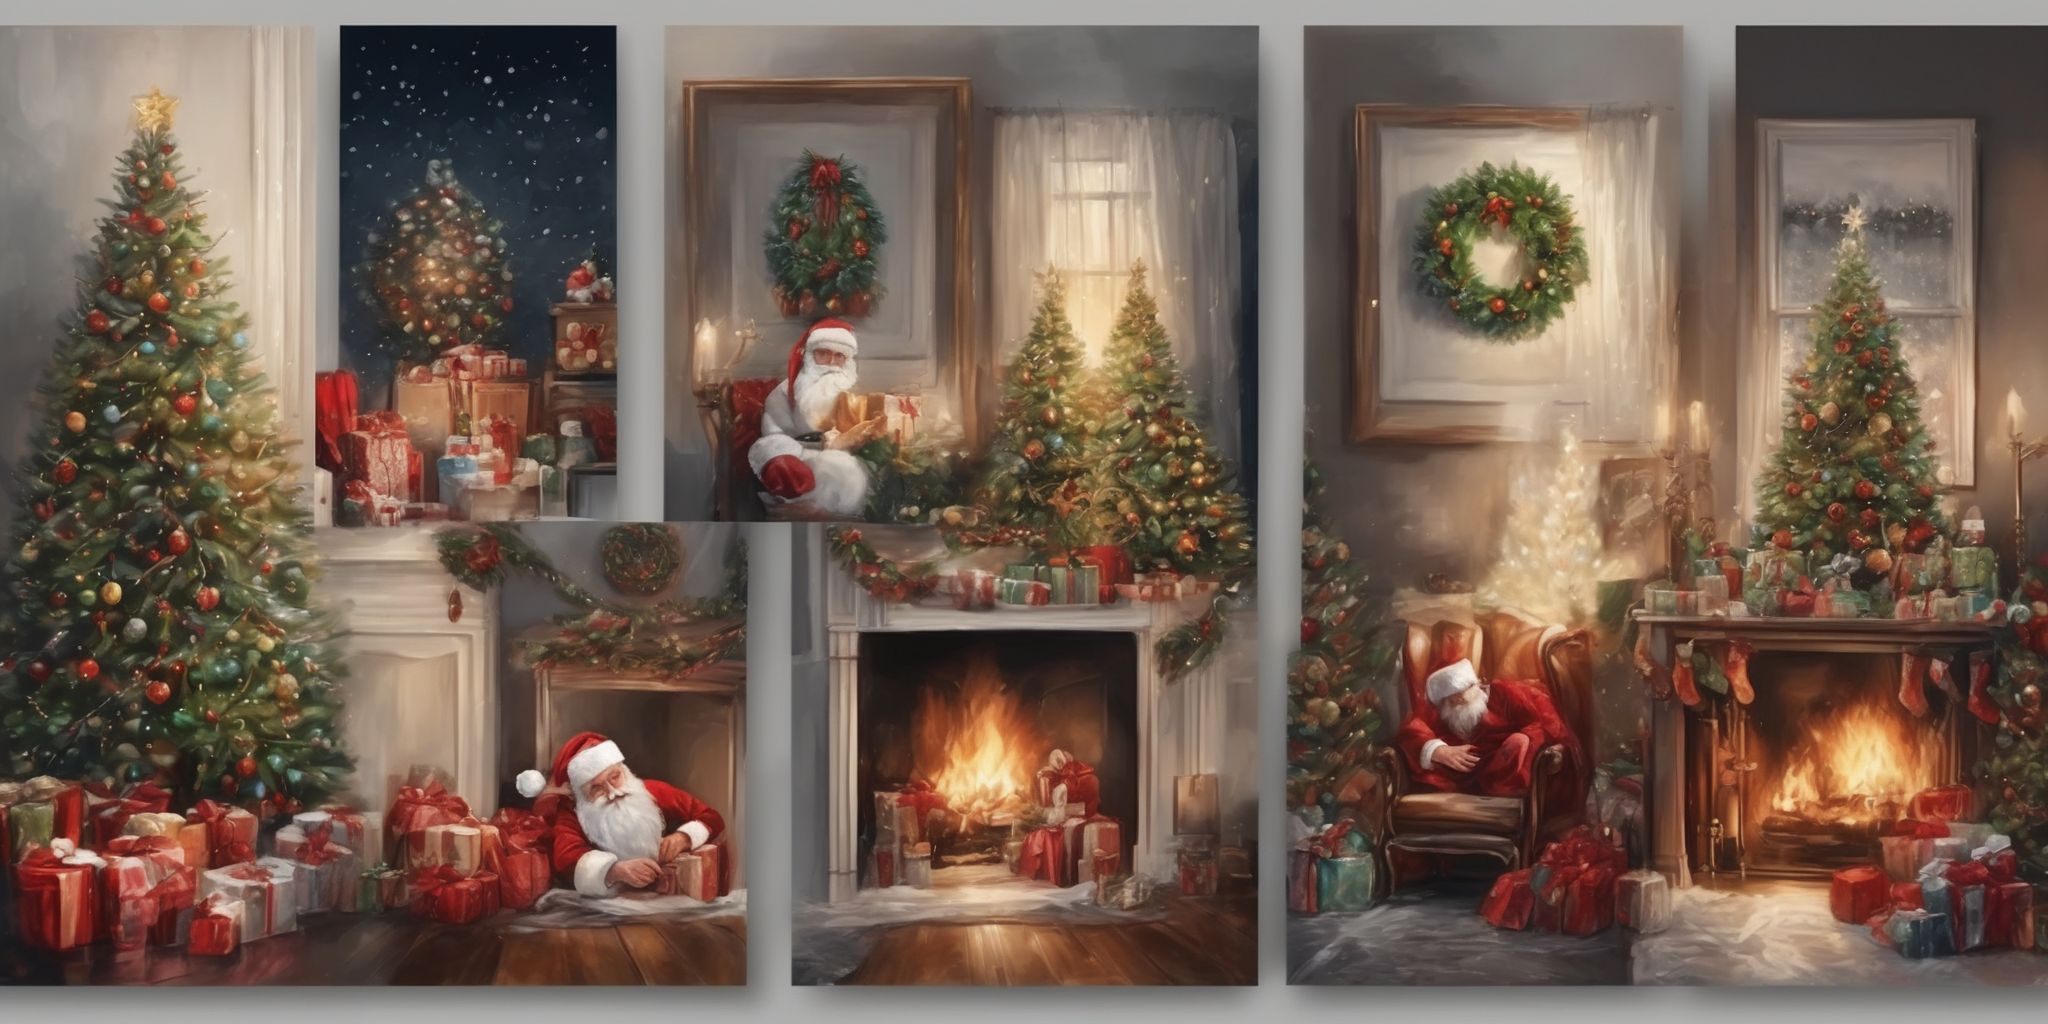 Paintings in realistic Christmas style